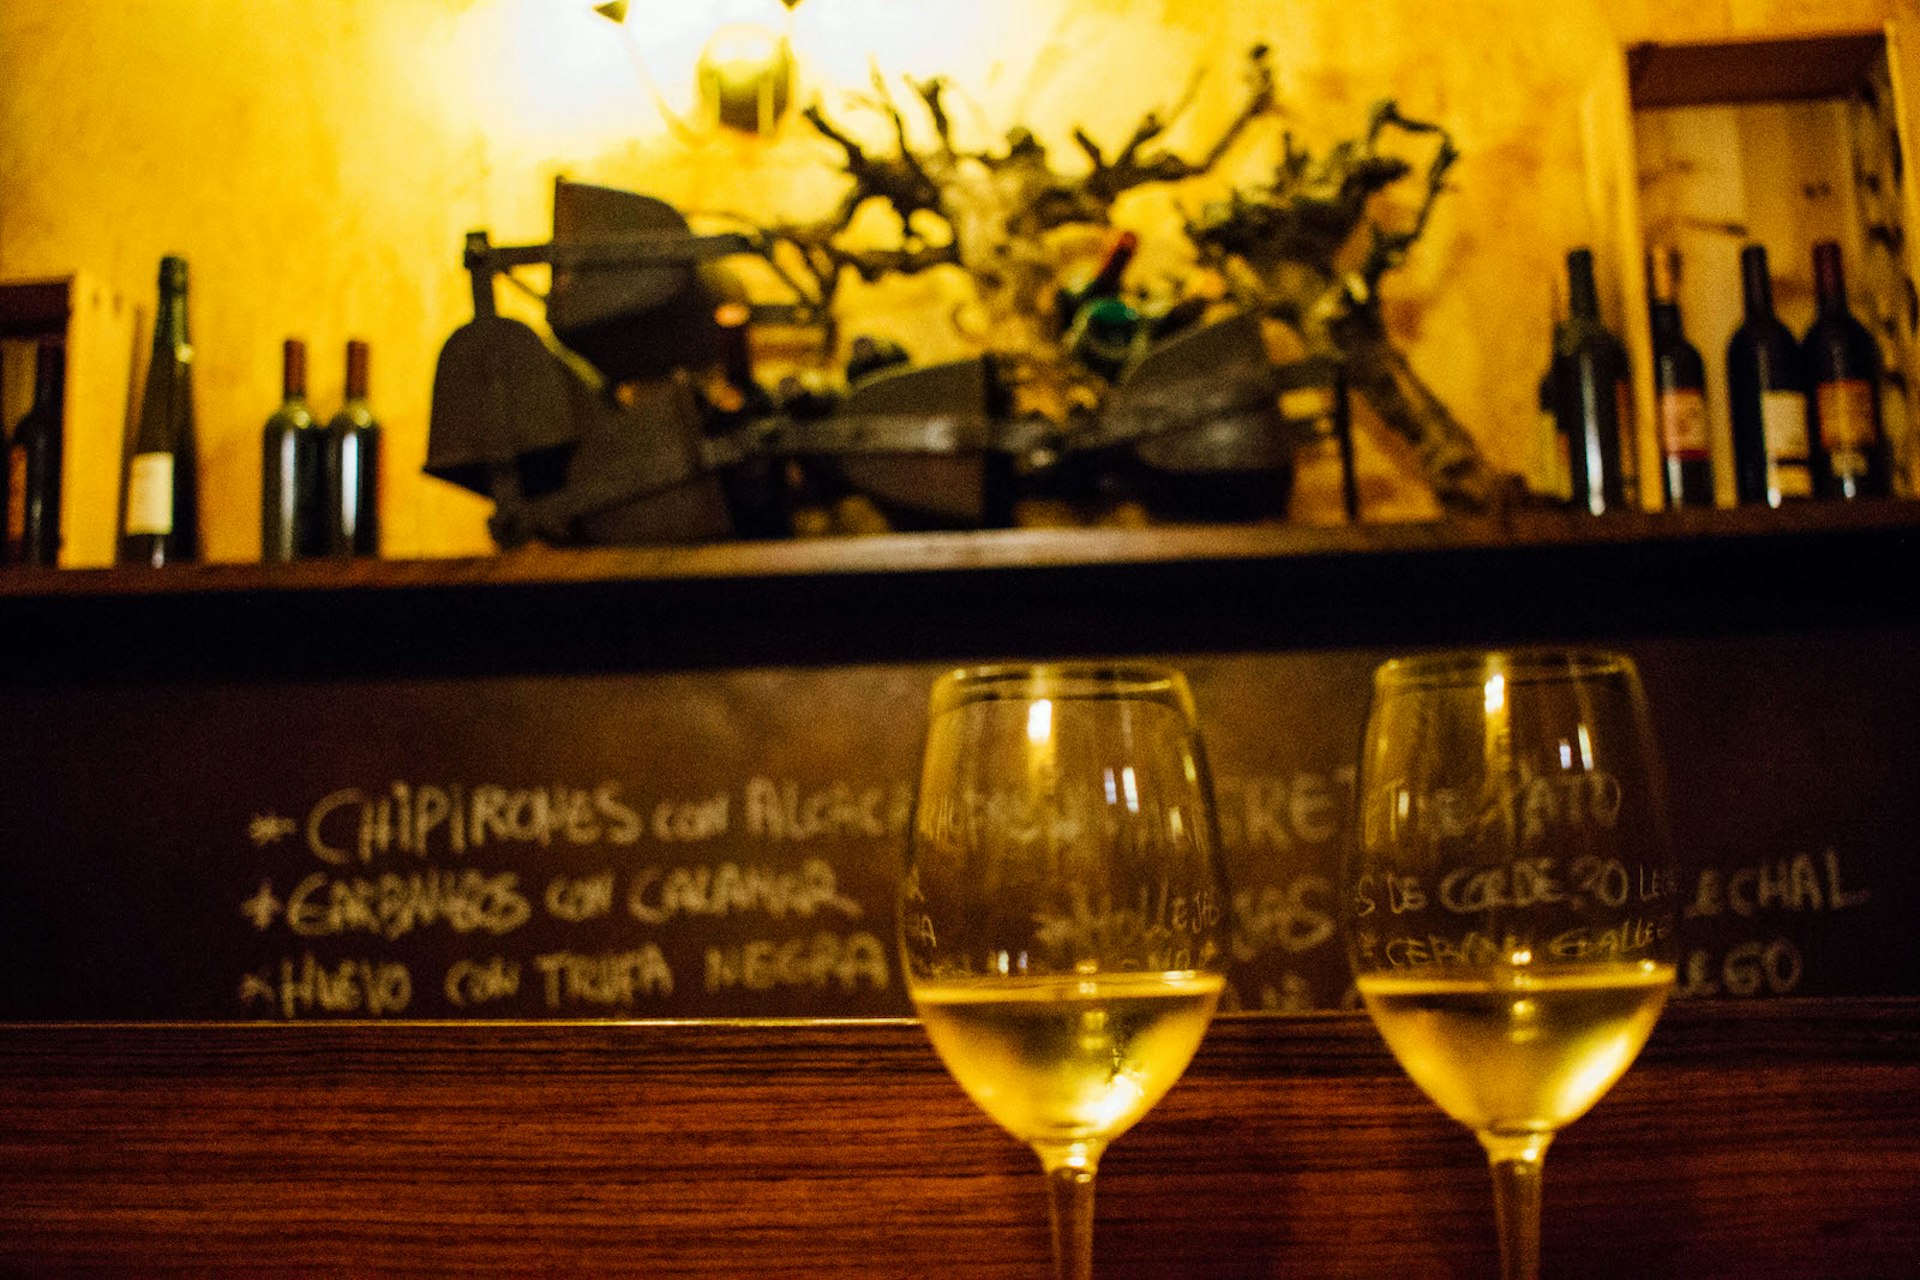 White wine and chalkboard recommendations at El Tempranillo © Cassandra Gambill / Lonely Planet